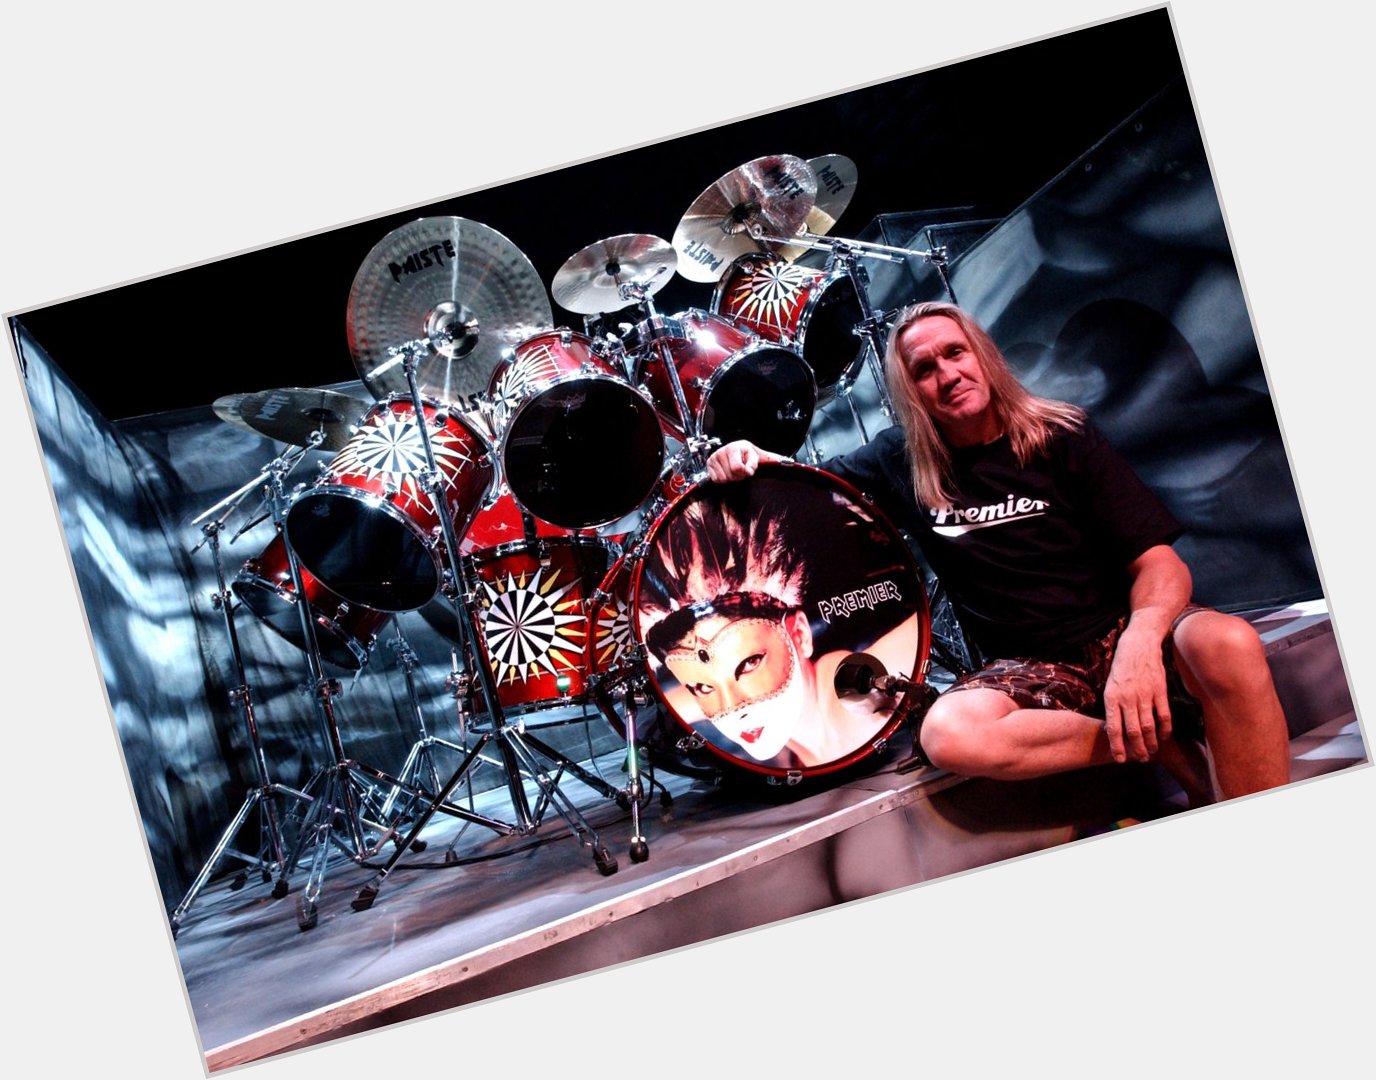 Happy birthday to the legendary drummer and our dear friend Nicko McBrain  